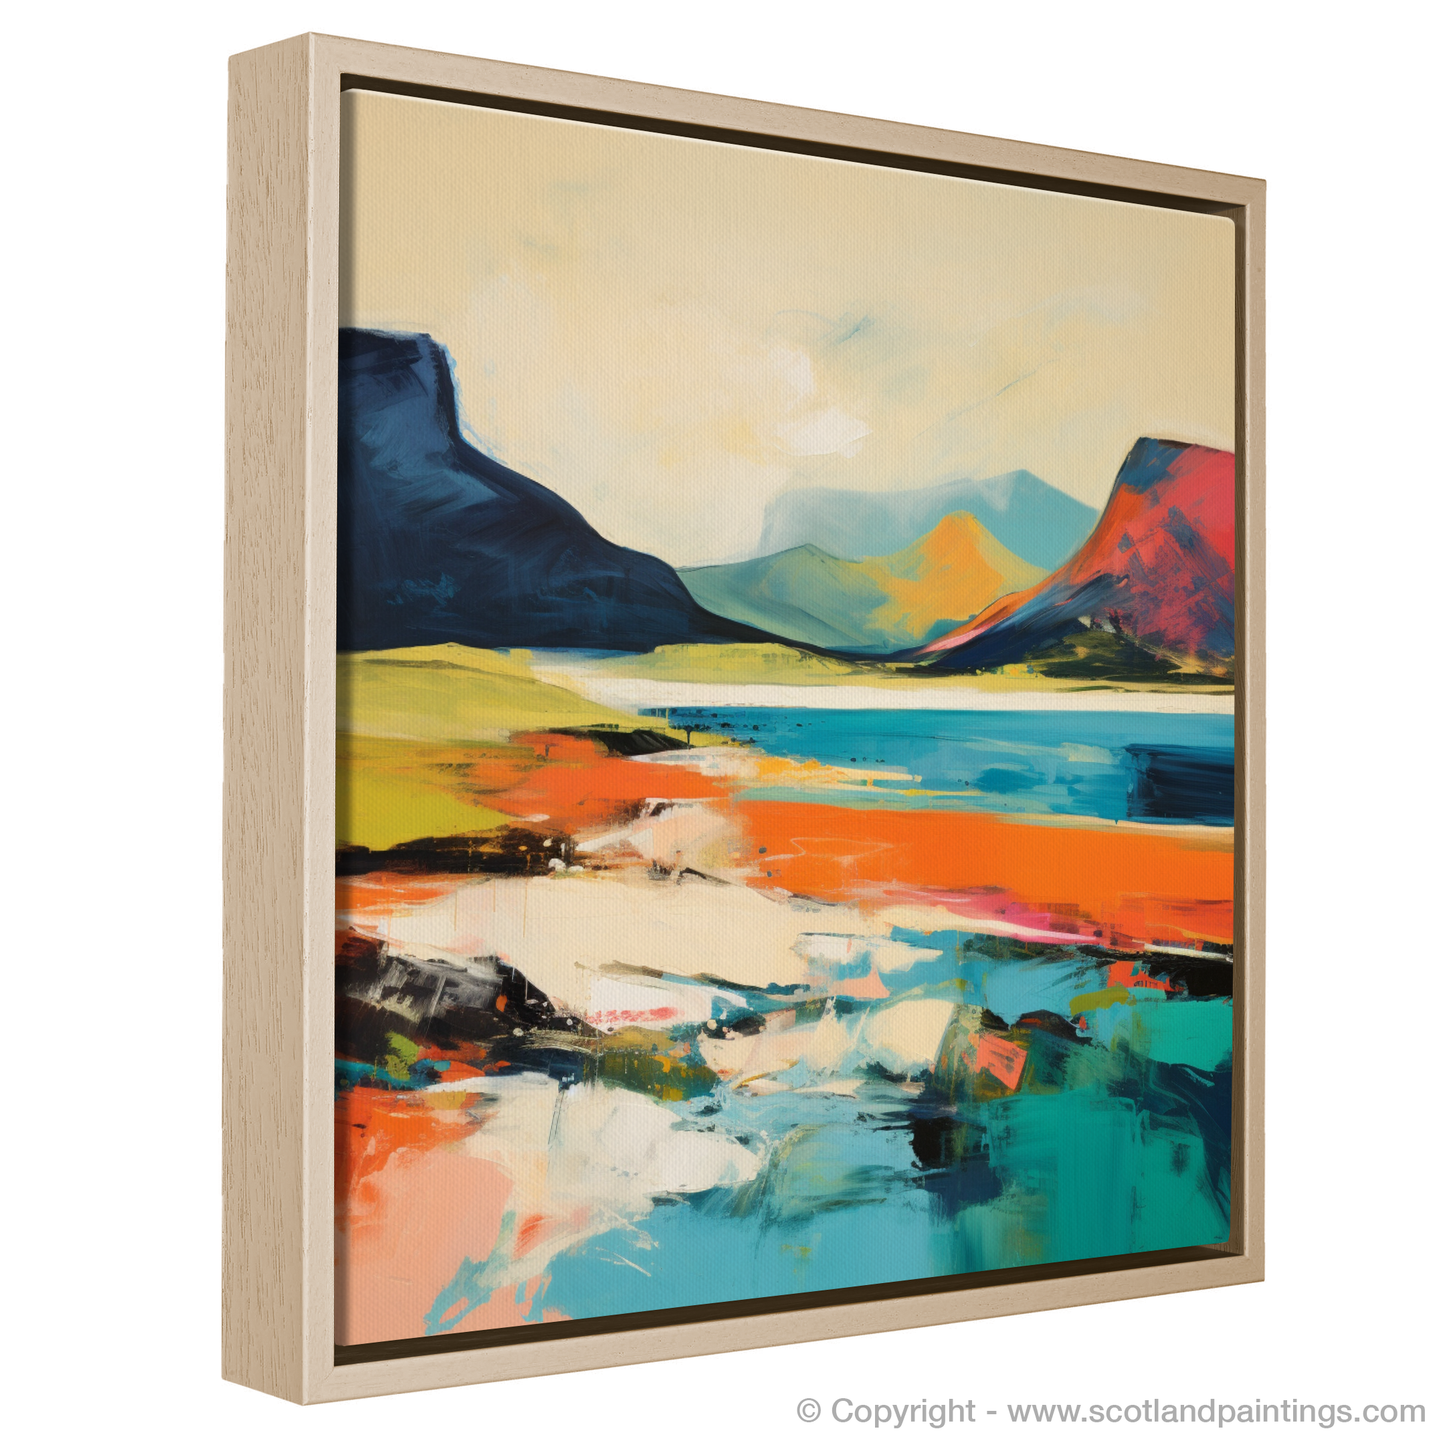 Coral Beach Dreamscape: An Abstract Ode to Skye's Coastline